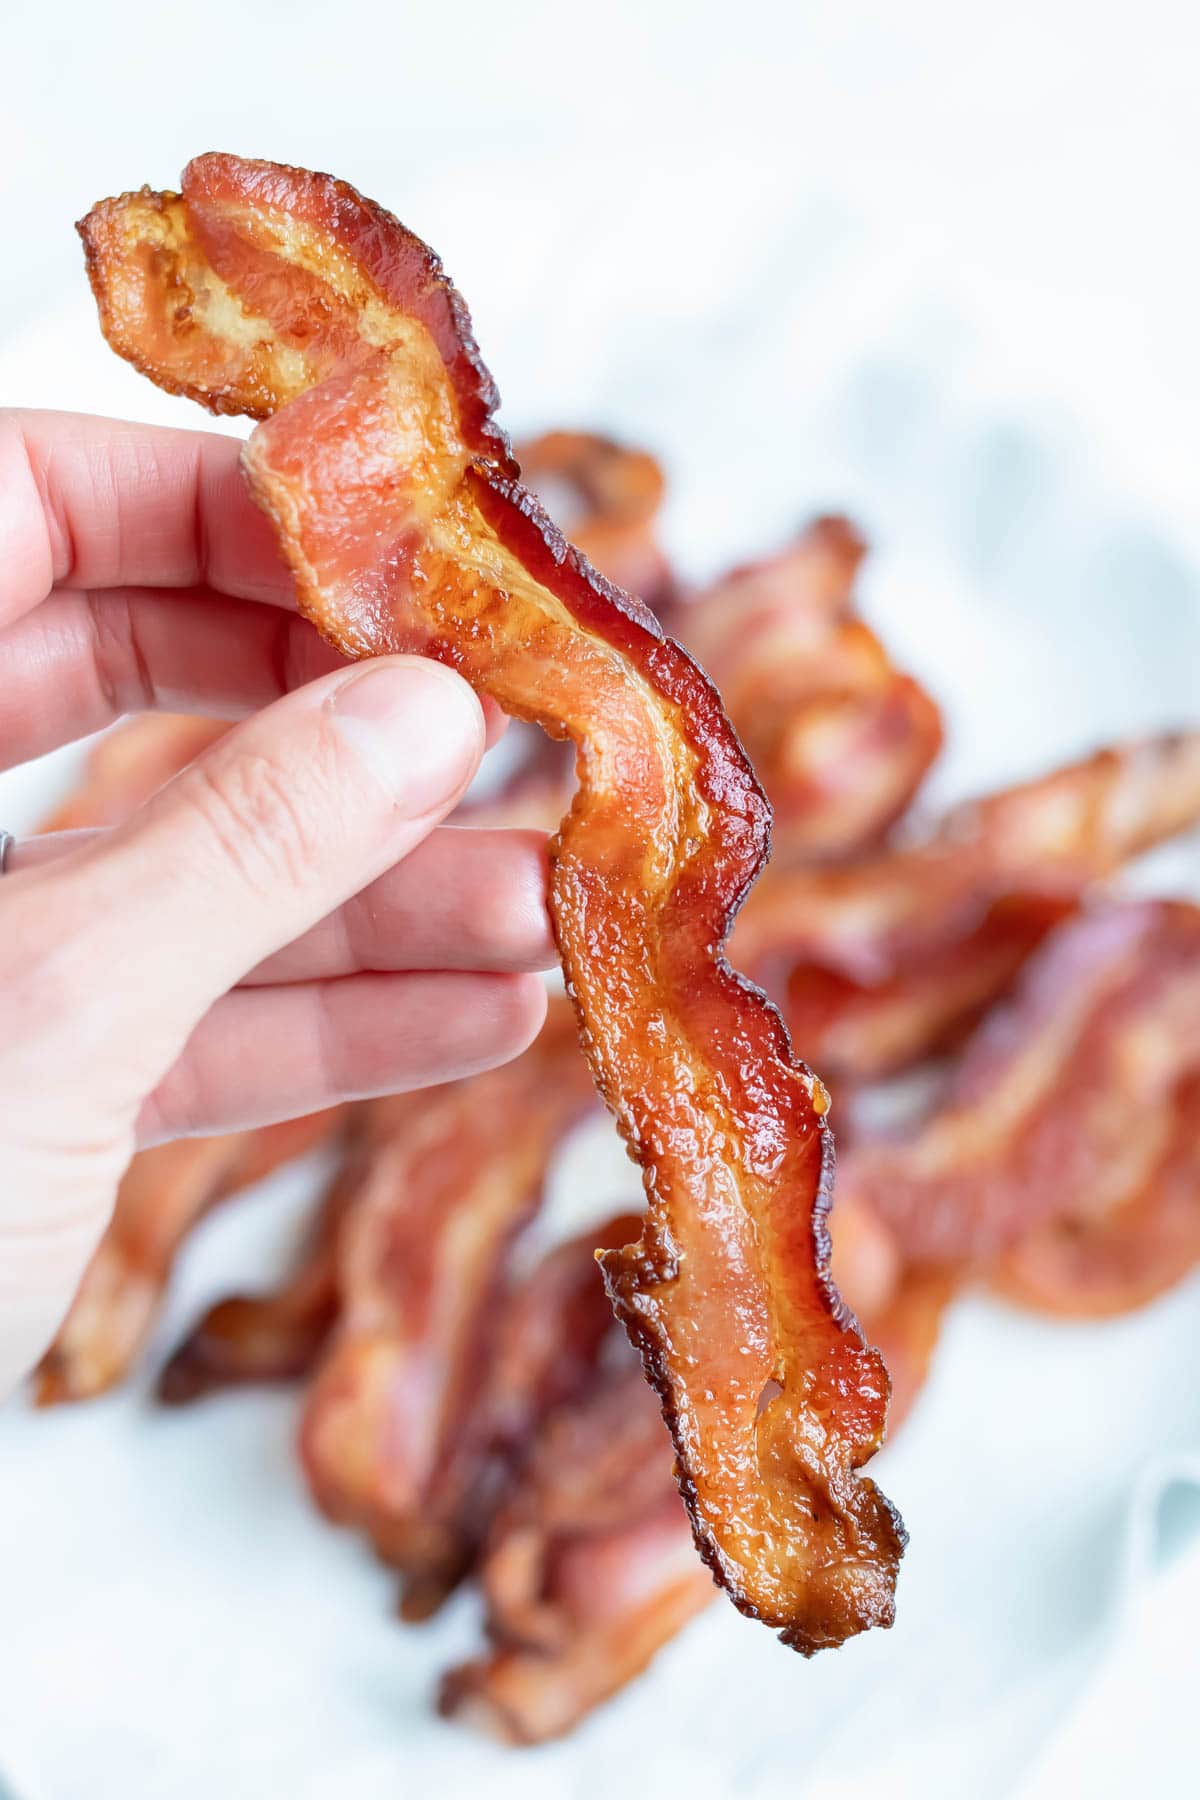 A slice of cooked bacon is lifted up by a hand.